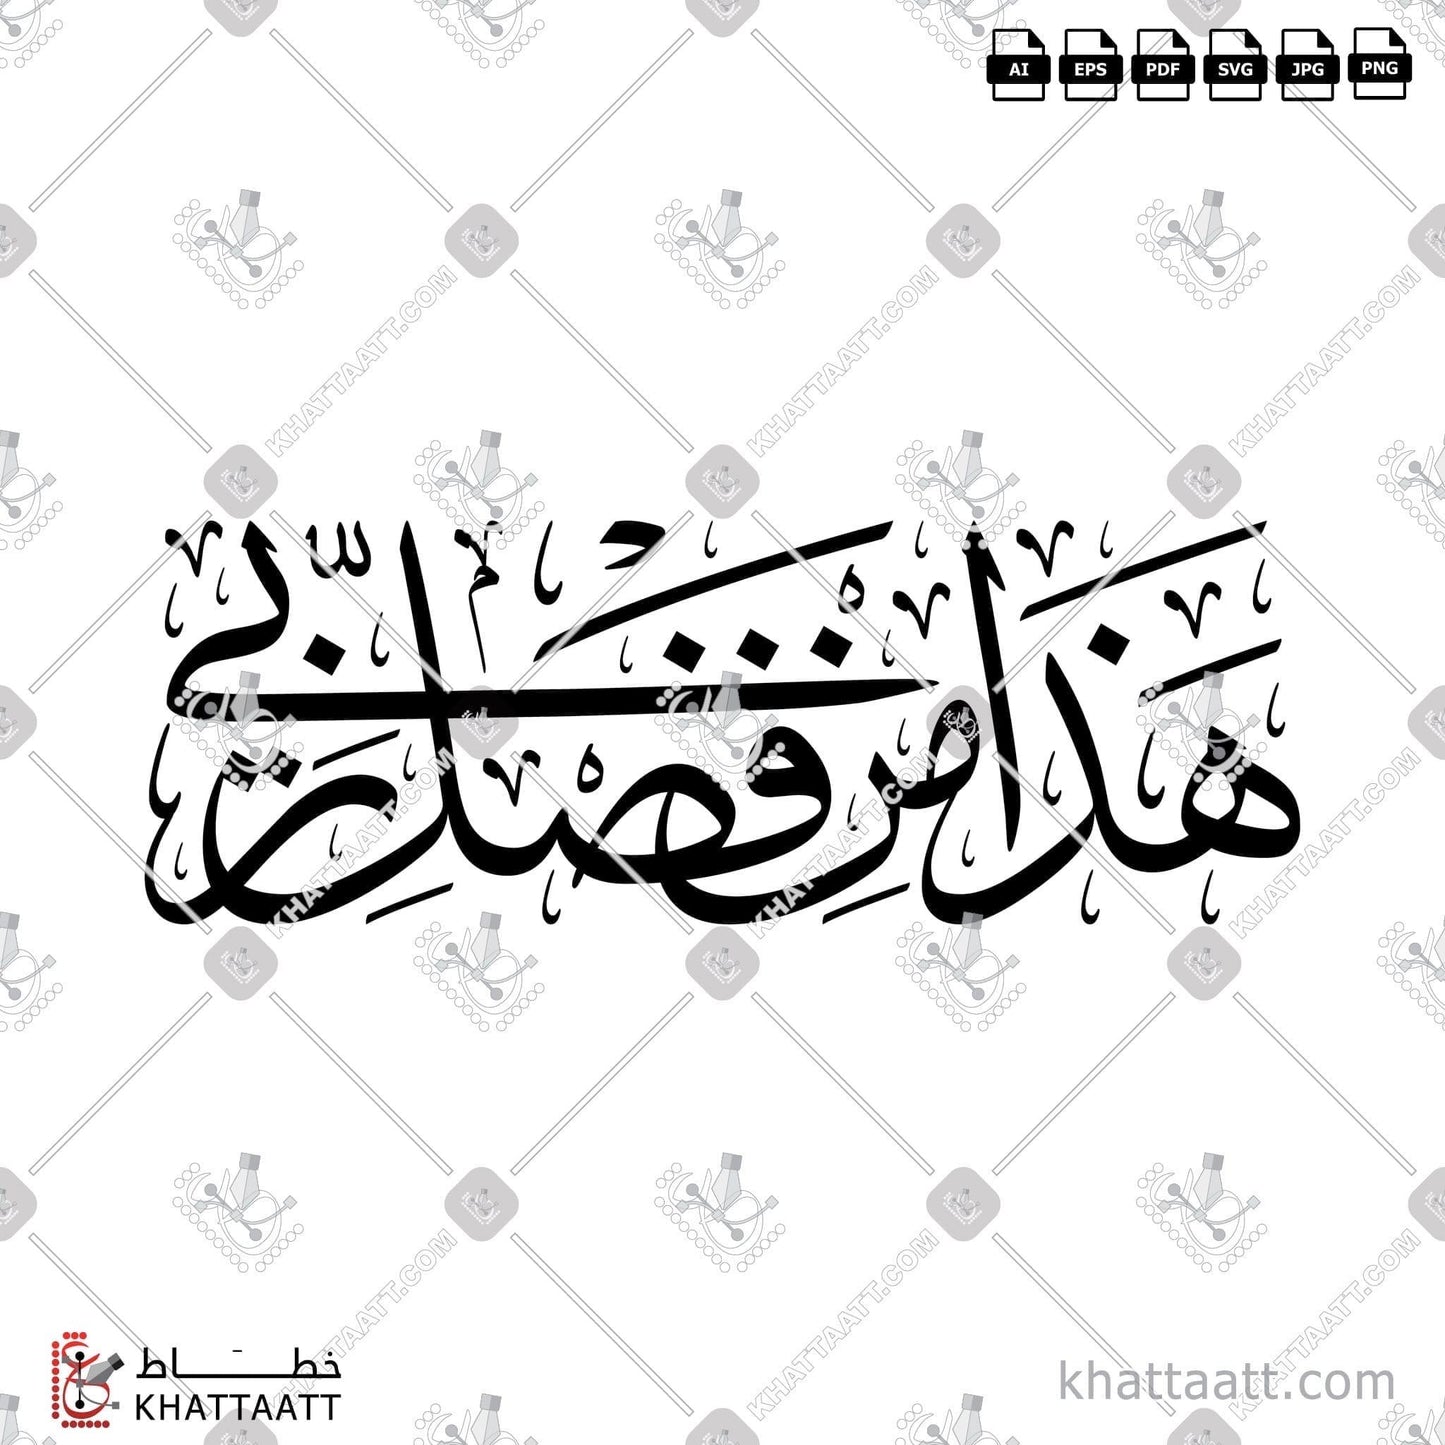 Download Arabic Calligraphy of هذا من فضل ربي in Thuluth - خط الثلث in vector and .png